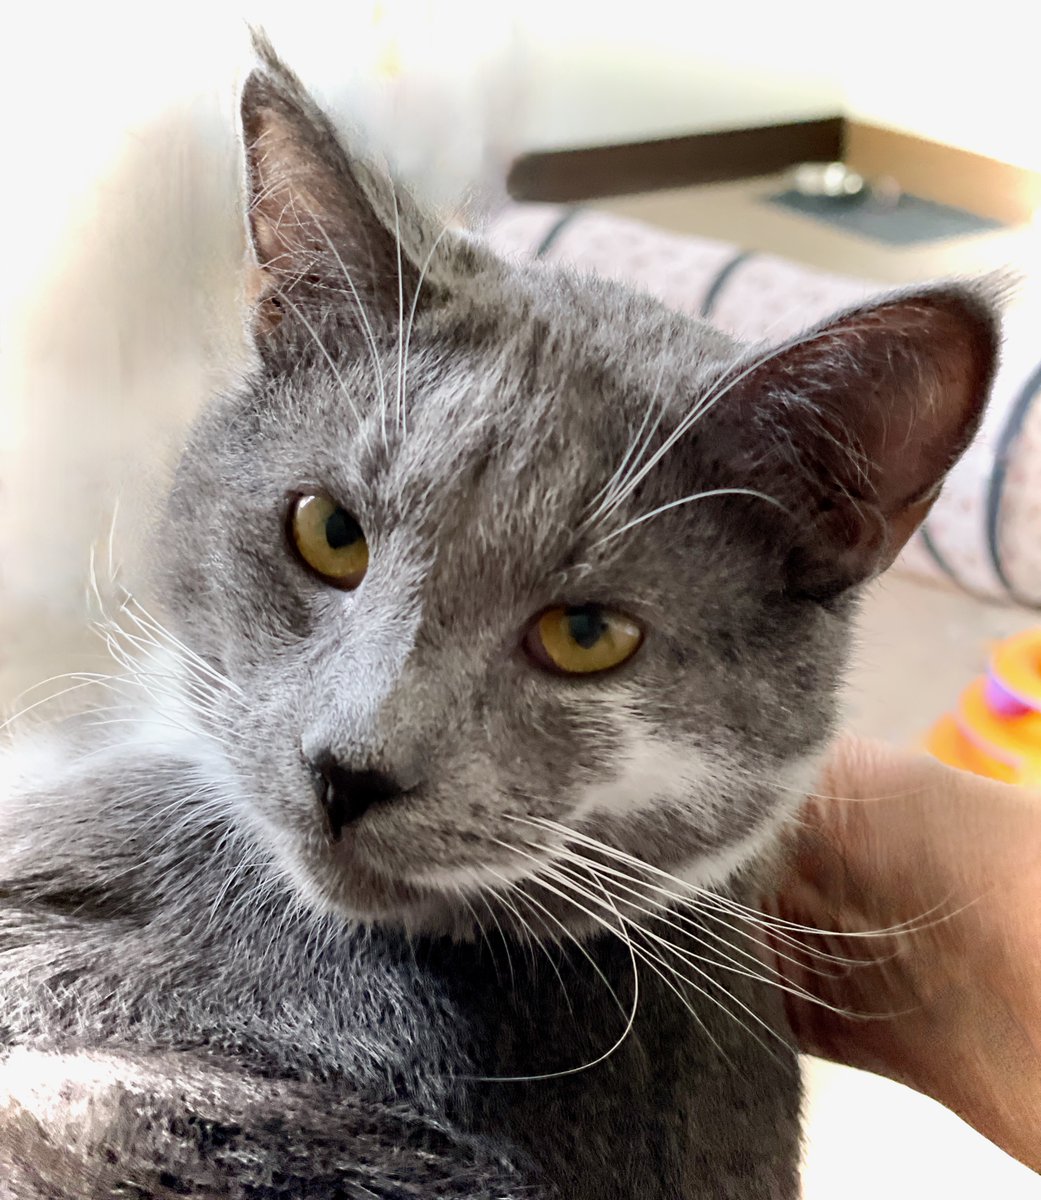 His visitor found him adorable, but Scrabble wasn't feeling the connection. When we & the potential adopter both sense that mysterious glue isn't there, we honor that. It has to be right (& the time will come.) So Scrabble's still available! #va #dc #cats #pets #caturday #kittens